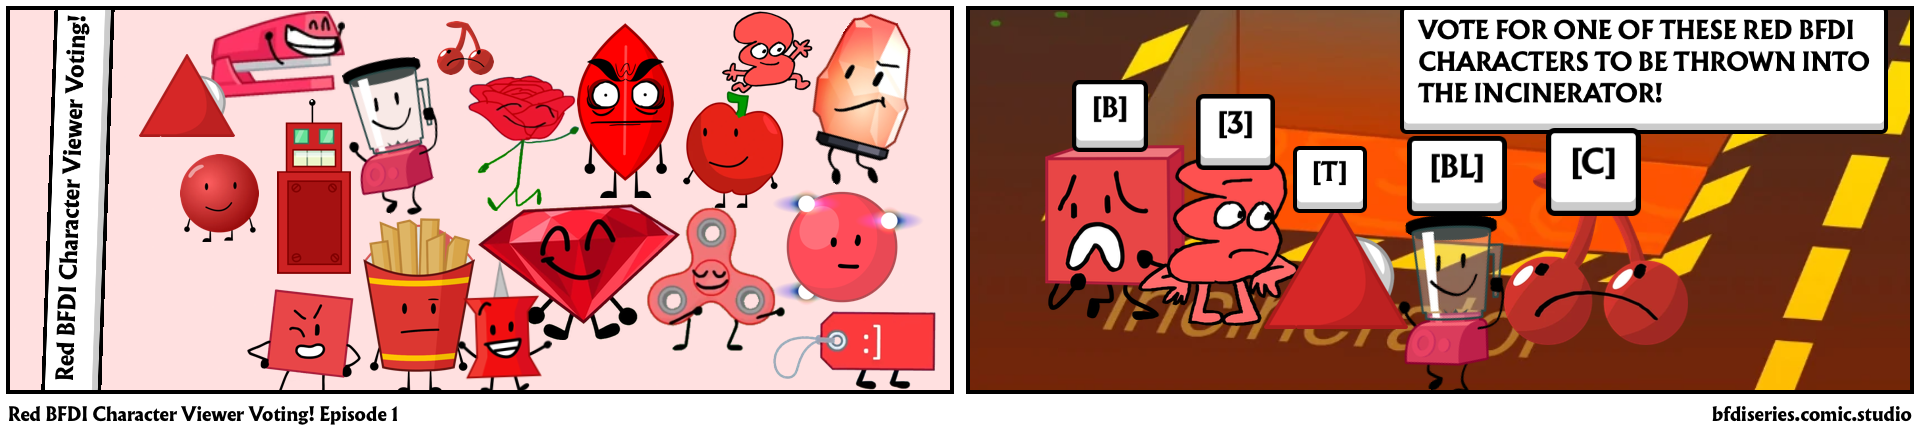 Red BFDI Character Viewer Voting! Episode 1